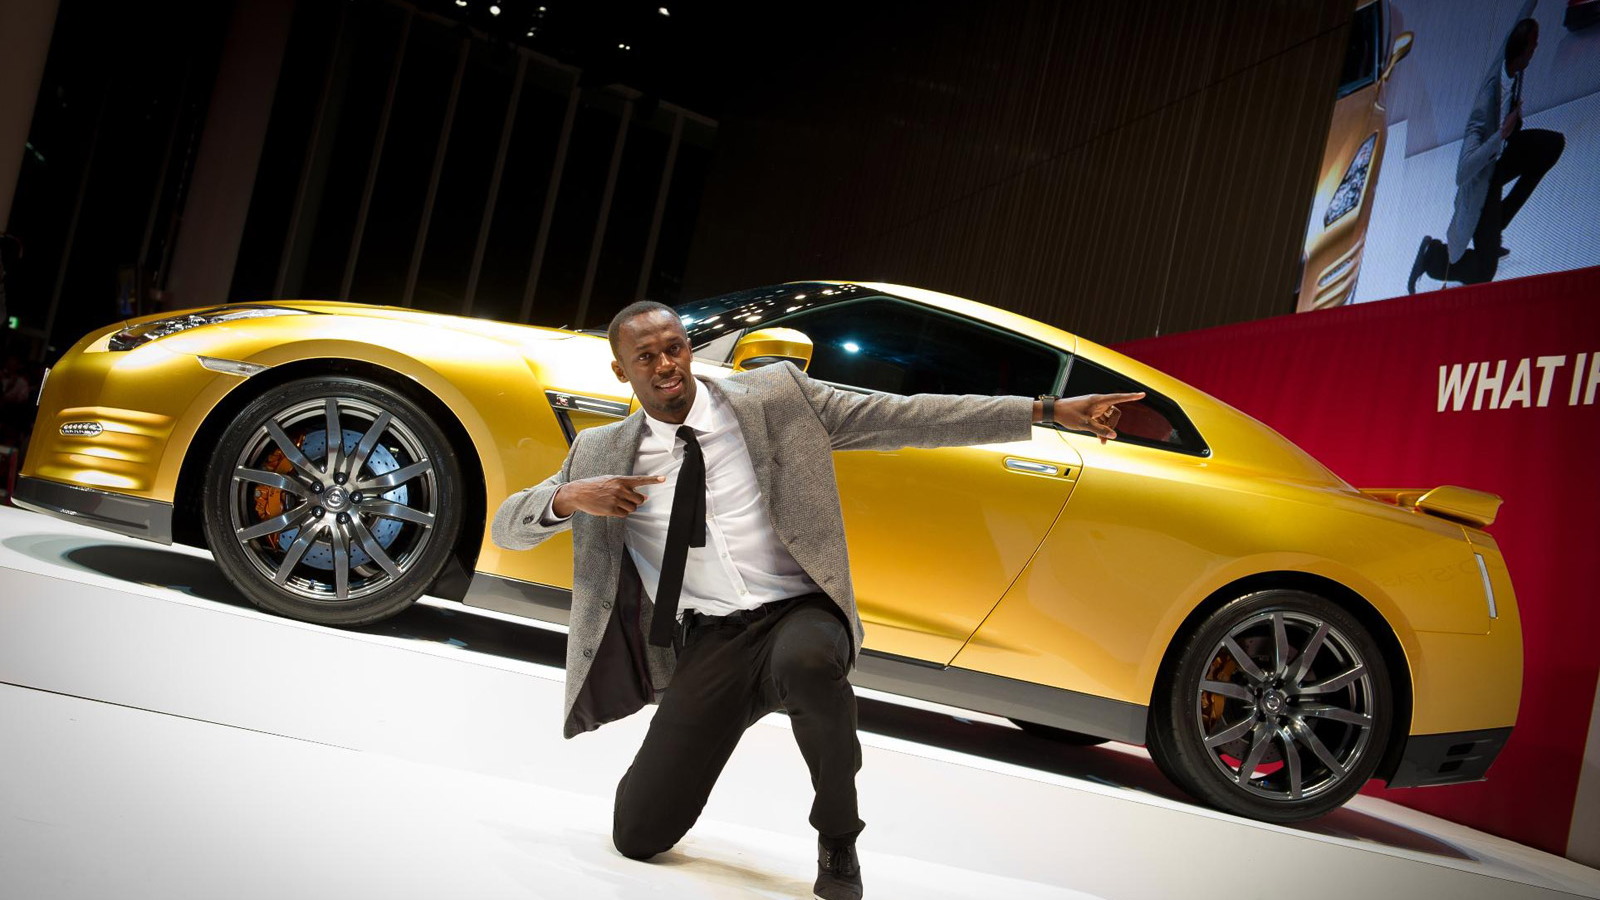 Usain Bolt and his personal gold Nissan GT-R